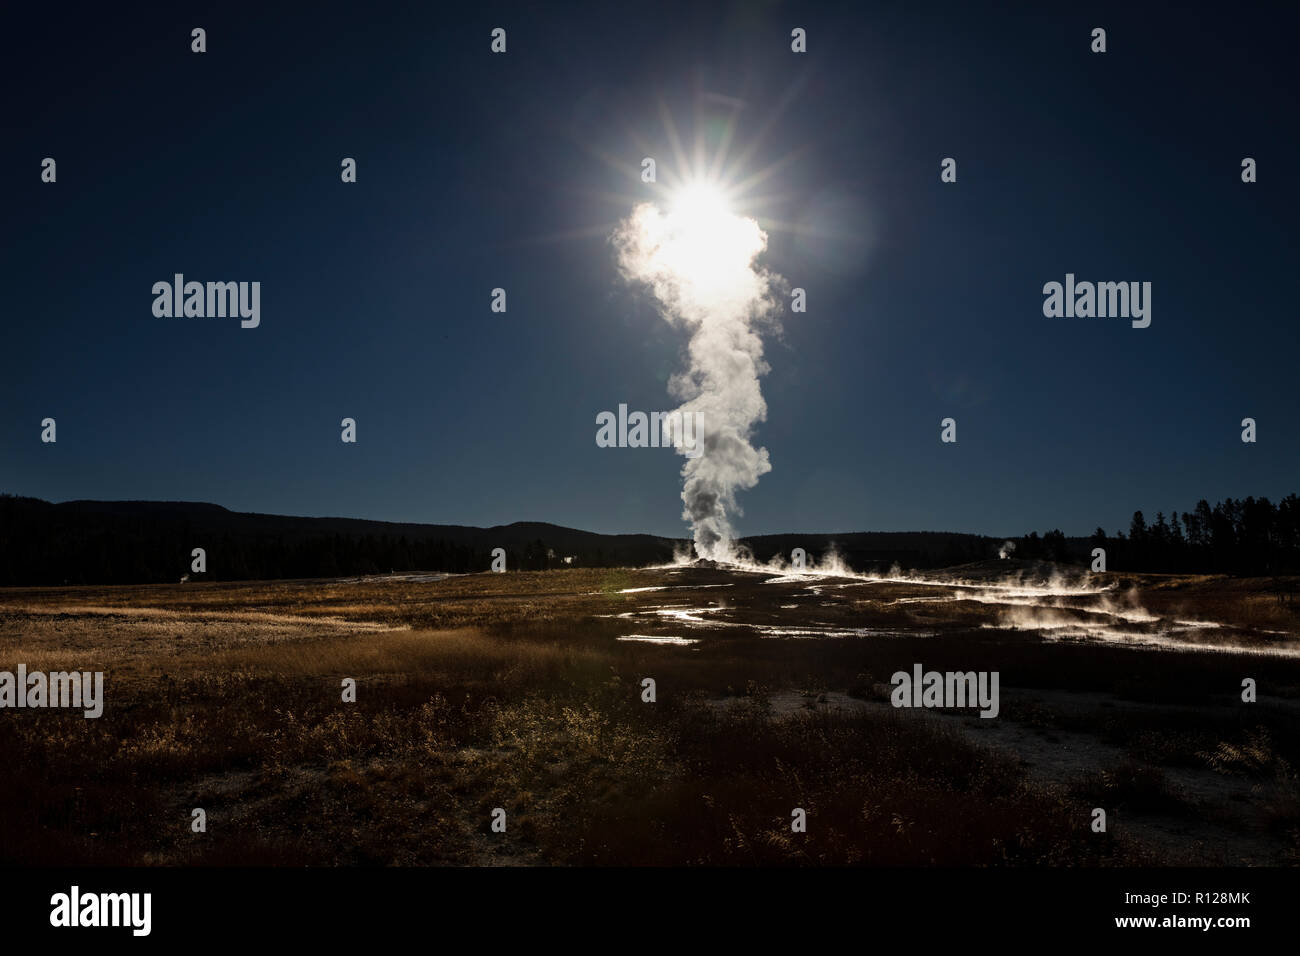 WY03592-00...WYOMING - Old Faithful Geyser dans le Parc National de Yellowstone. Banque D'Images